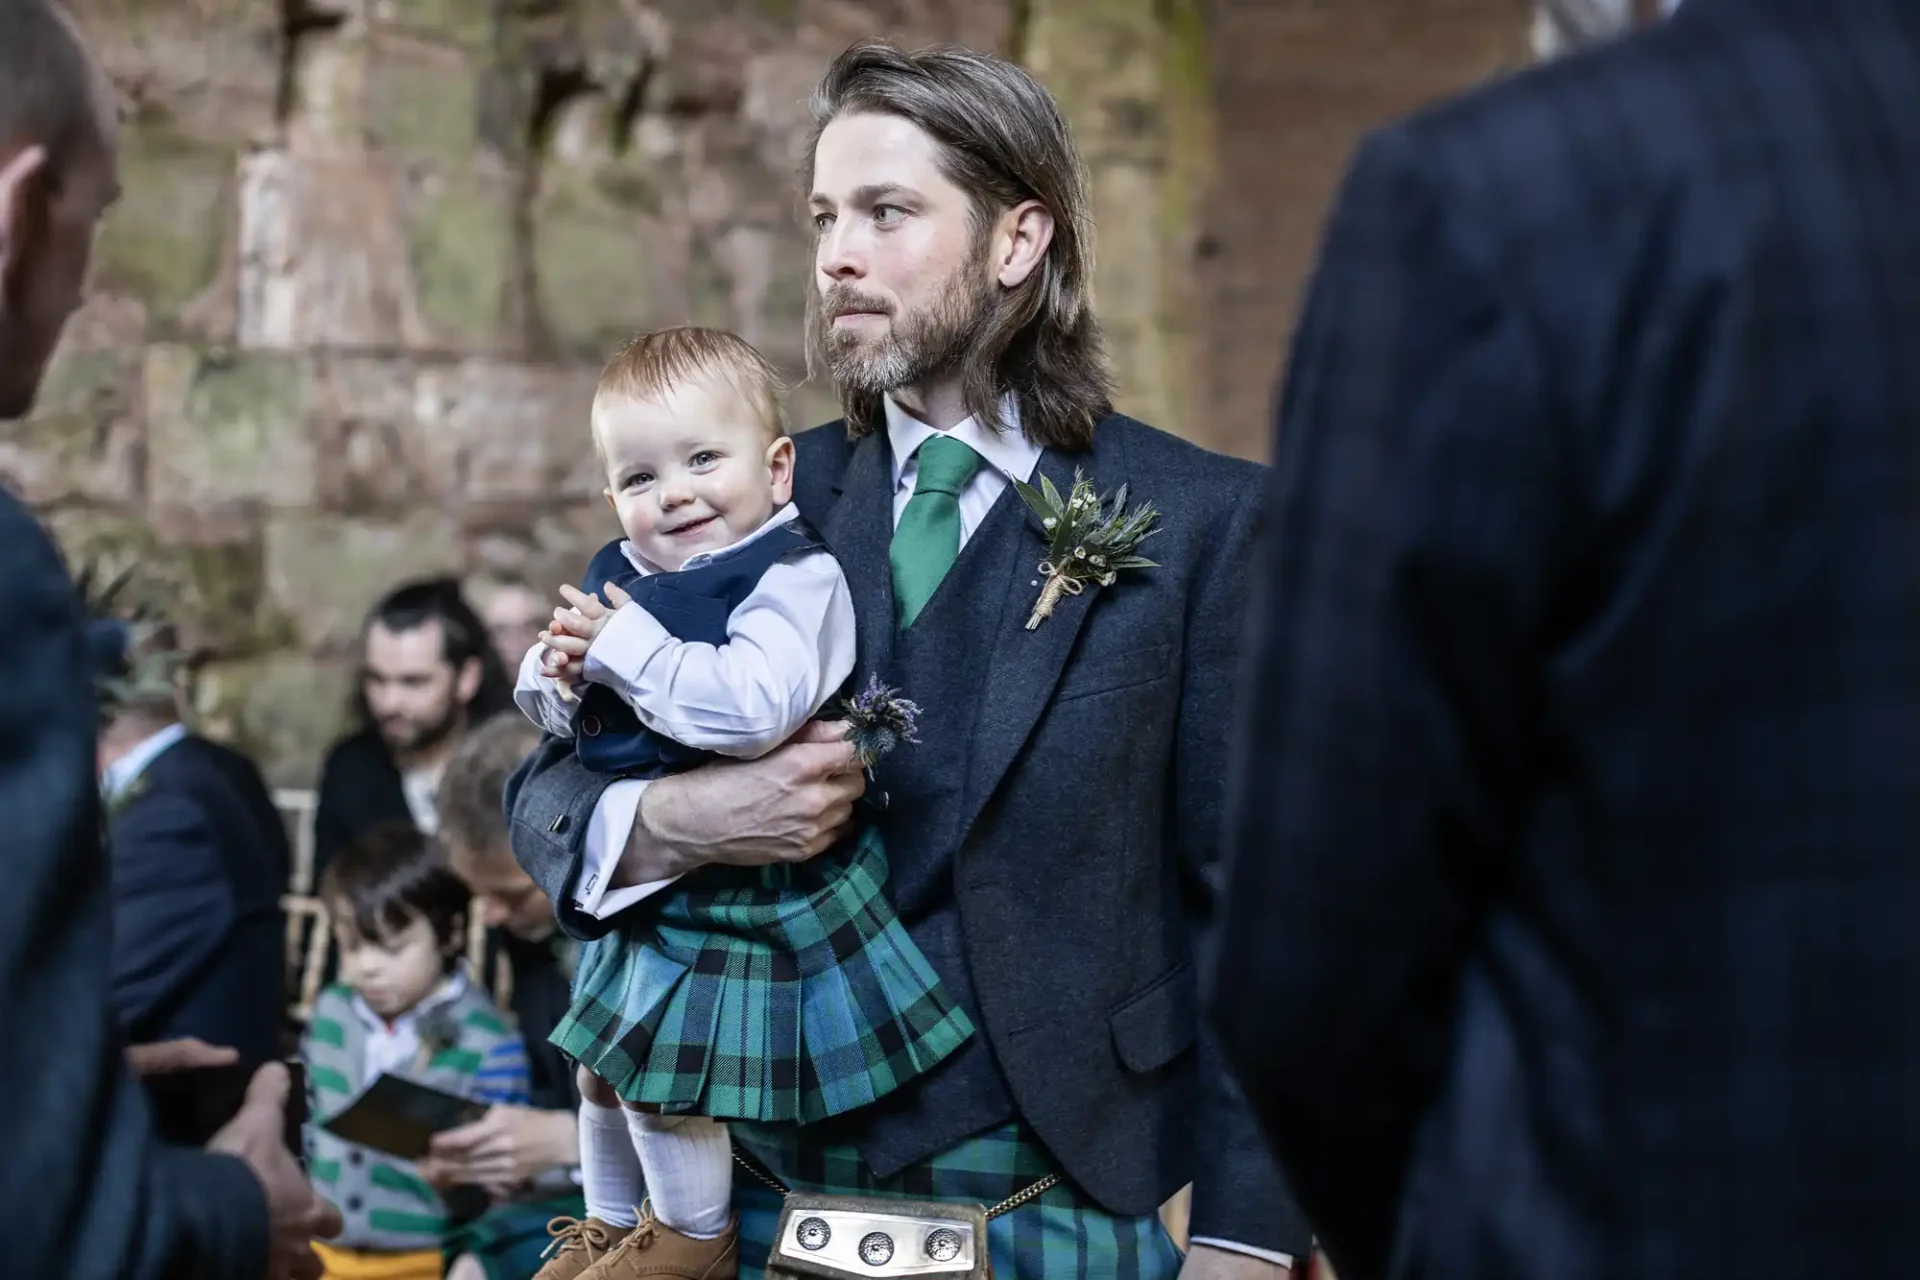 A man in a traditional kilt holds a smiling baby also dressed in a similar outfit. They are indoors with other people in the background.